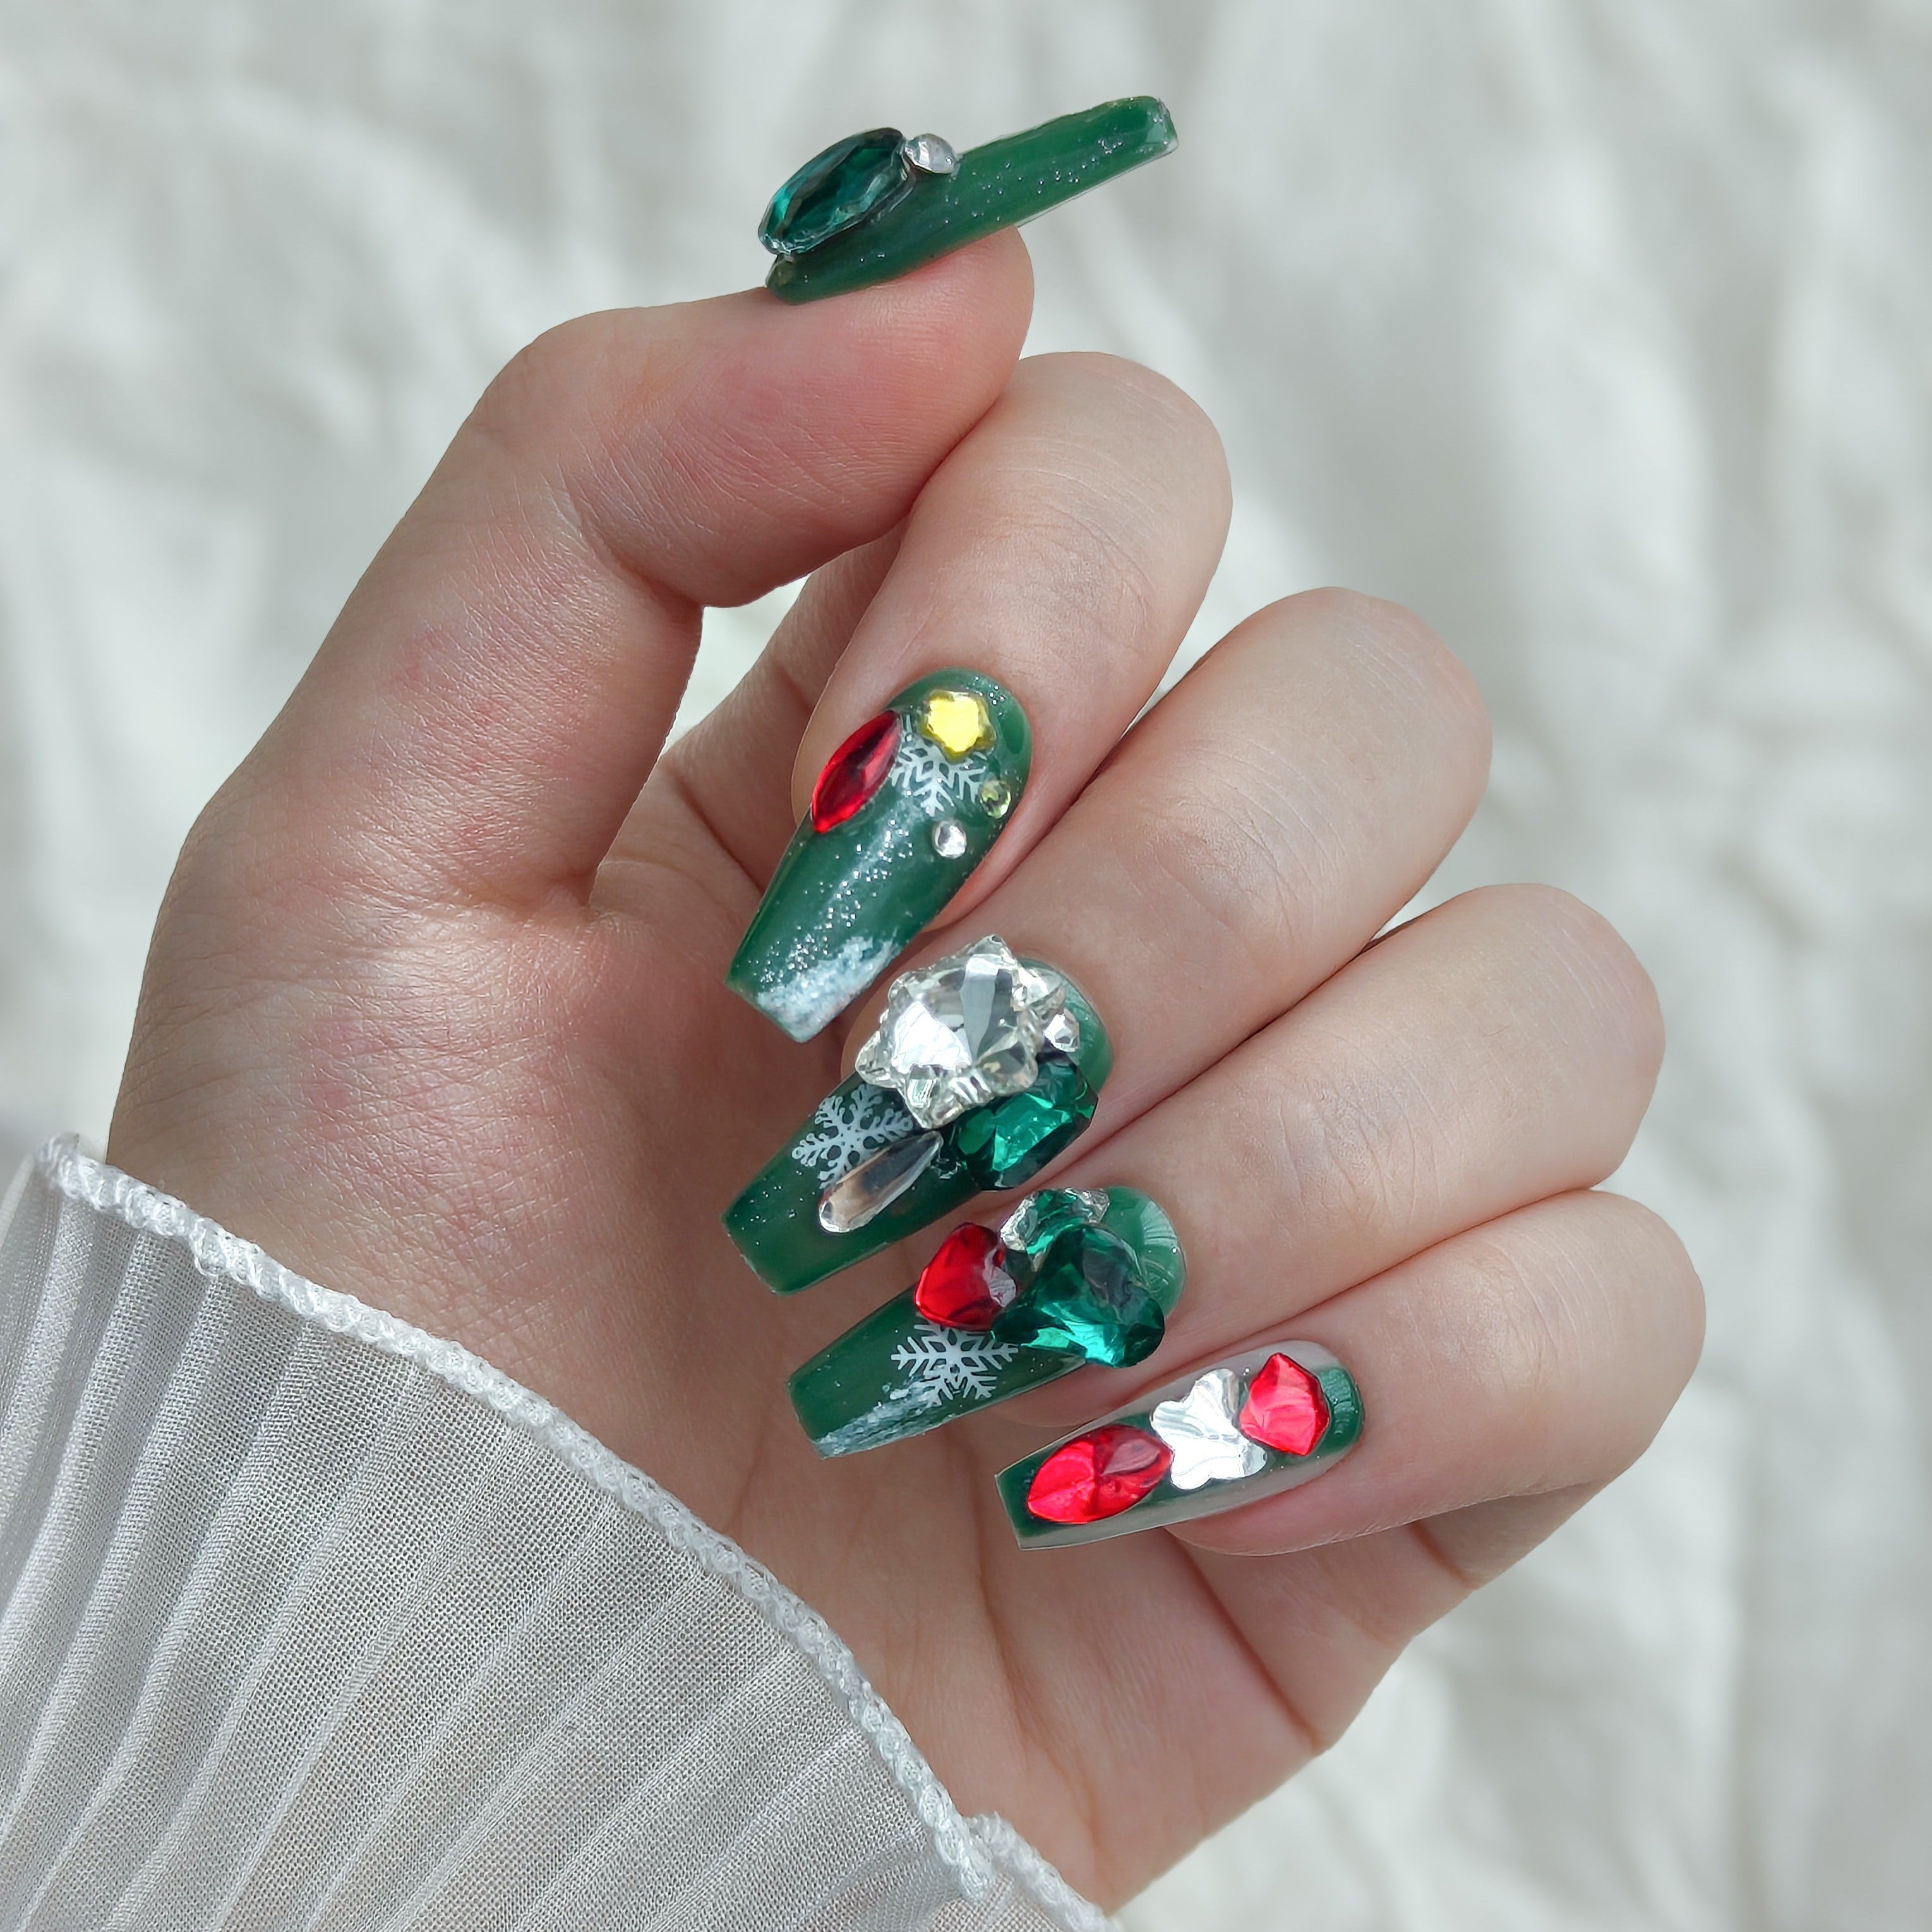 christmas nails in ugly Christmas sweater style